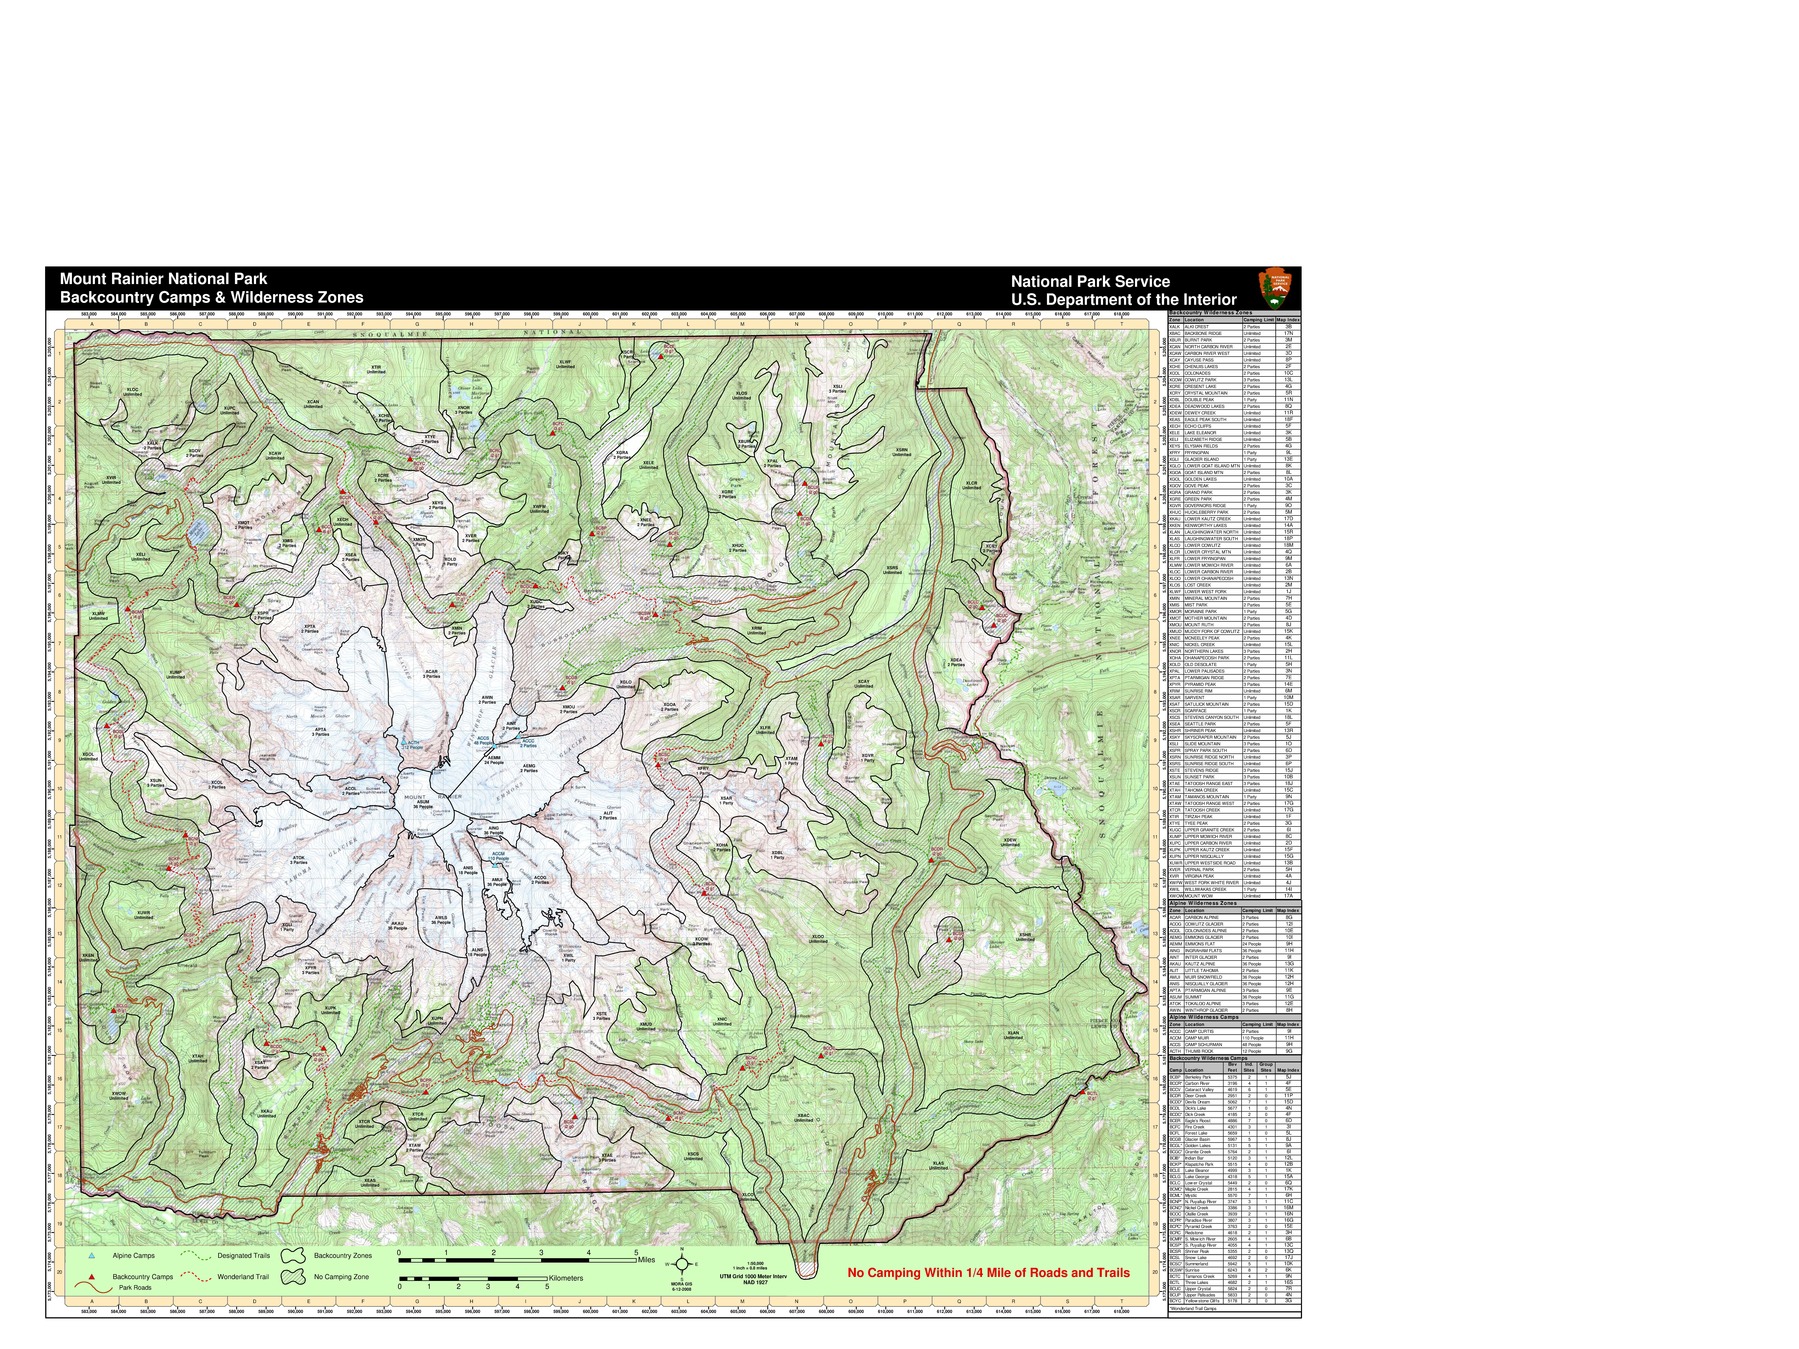 A large map of Mount Rainier National Park with tables listing locations of backcountry camps and wilderness camping zones. The map has a topographic background overlaid with lines marking the borders of each wilderness zone. Shaded areas border each road and trail indicating areas closed to camping. Backcountry camps are marked by red triangles. Alpine camps by blue triangles. 